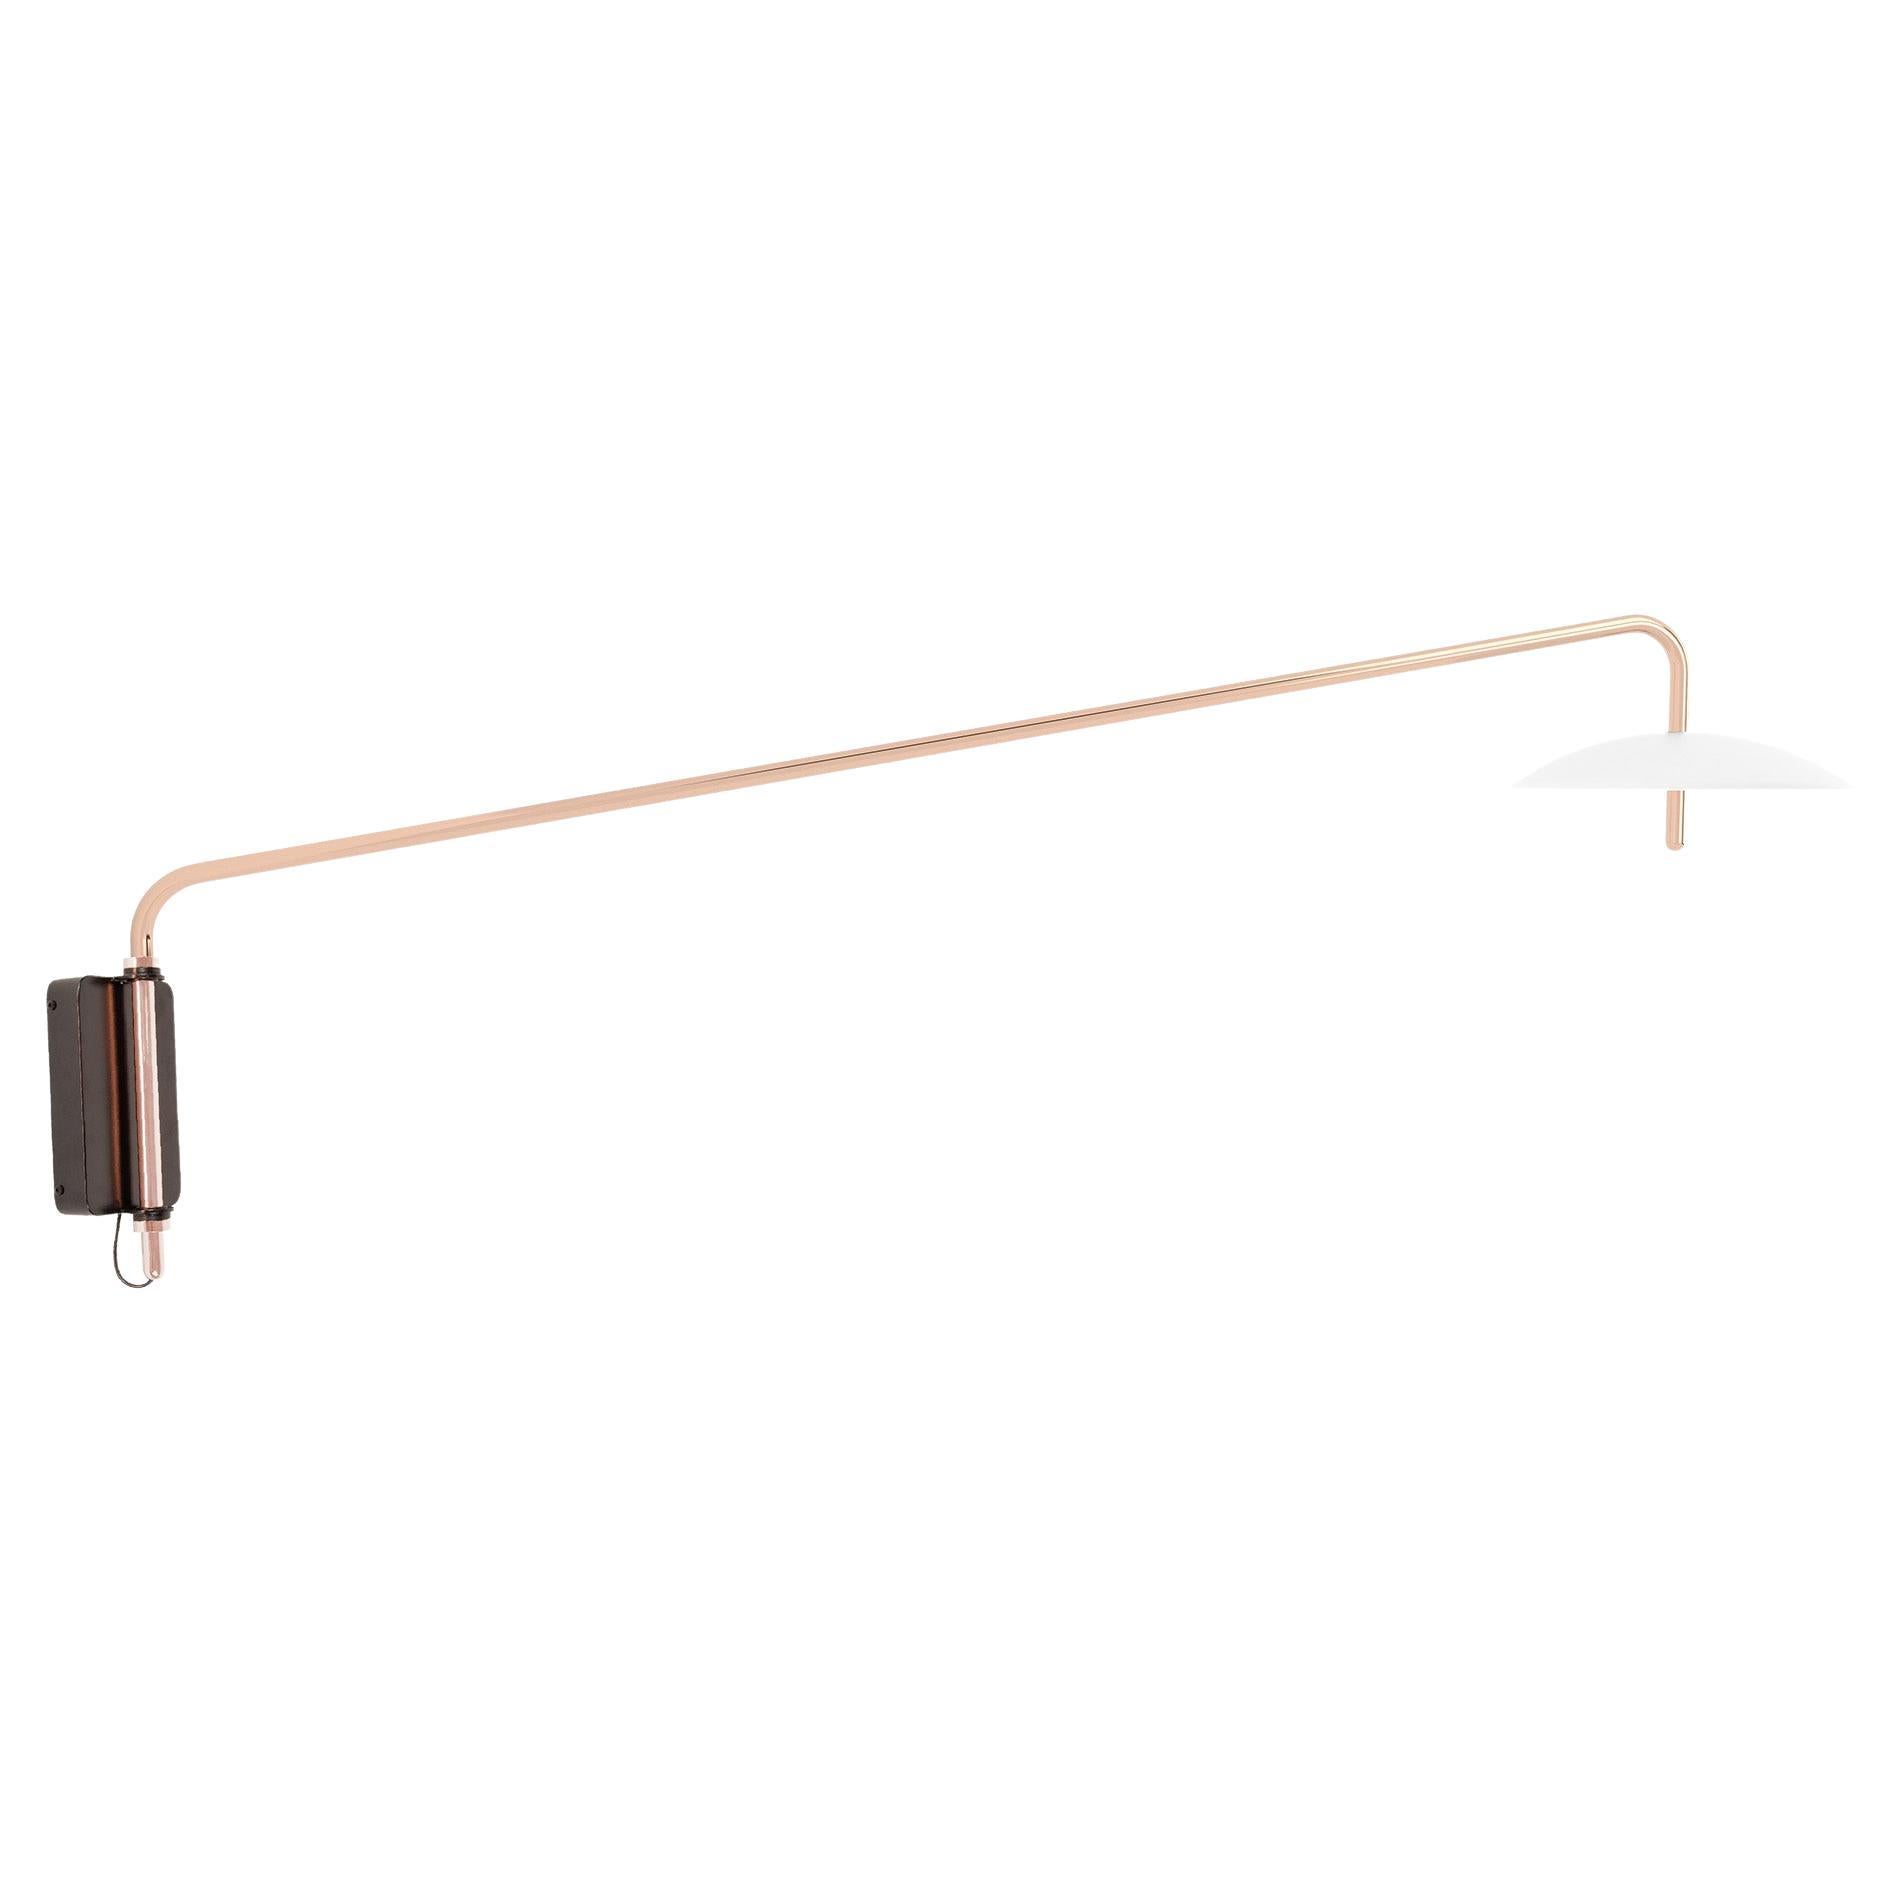 Signal Arm Sconce in White x Copper, Long, Hardwire, by Souda, Made to Order